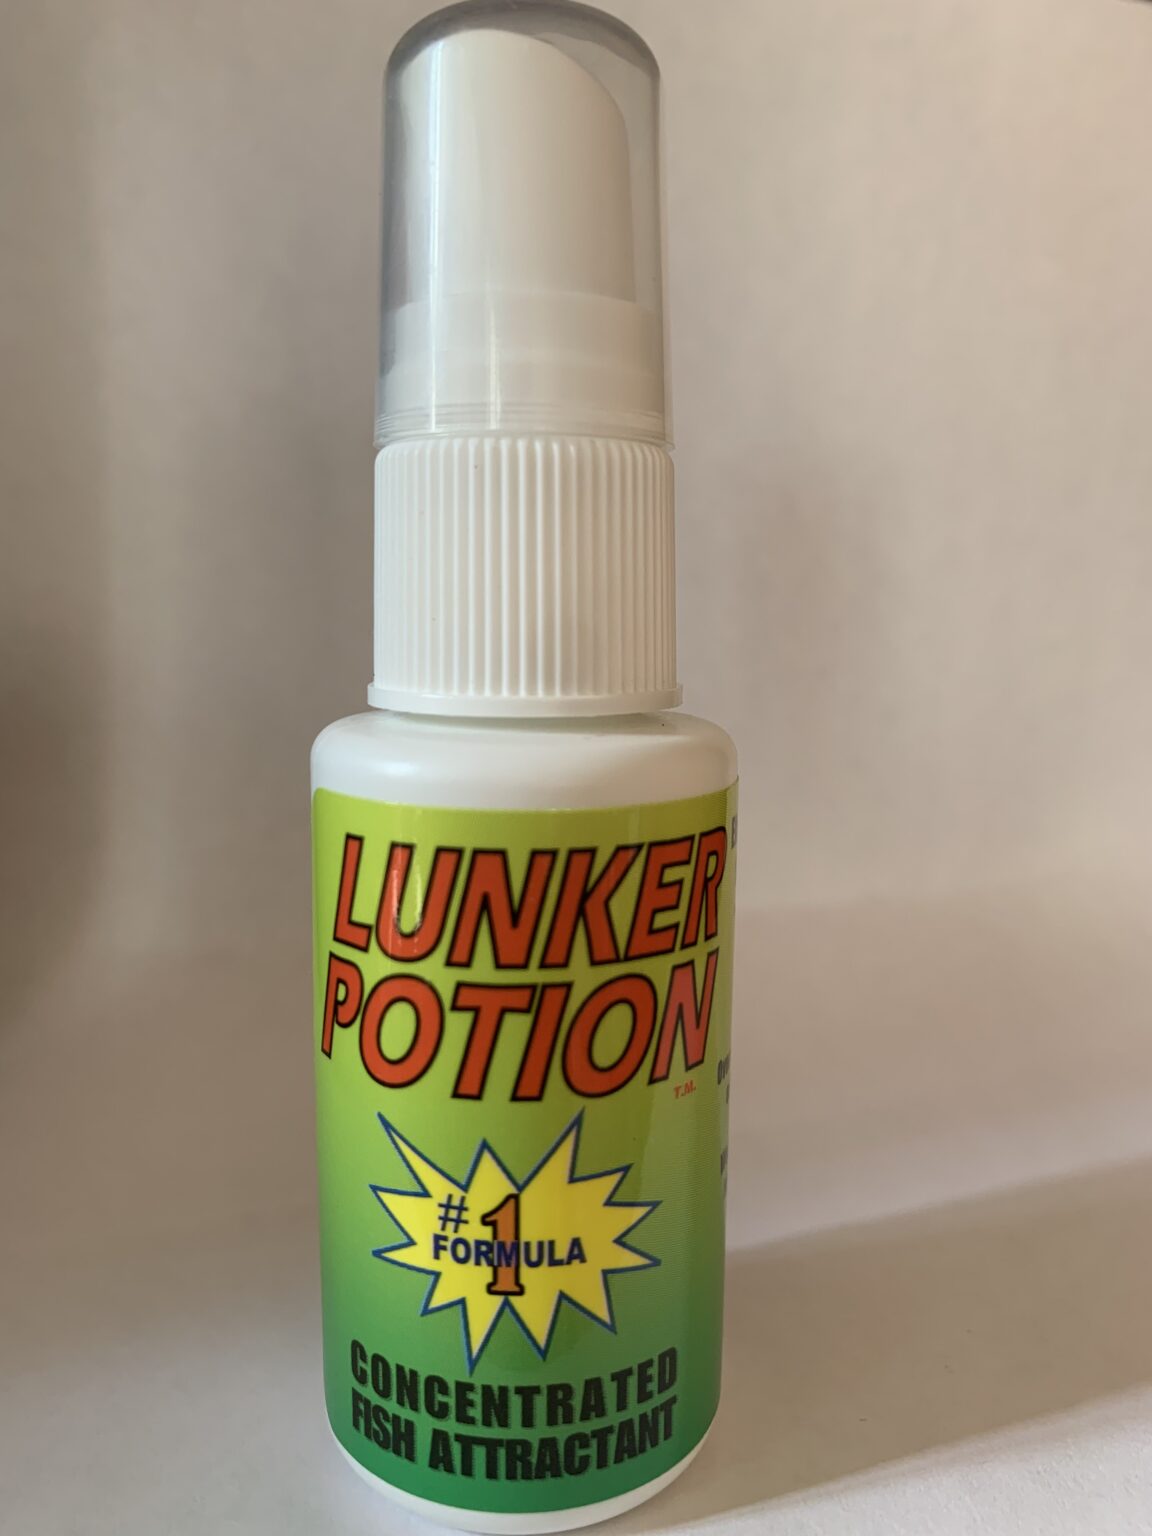 A bottle of lunker potion is shown.